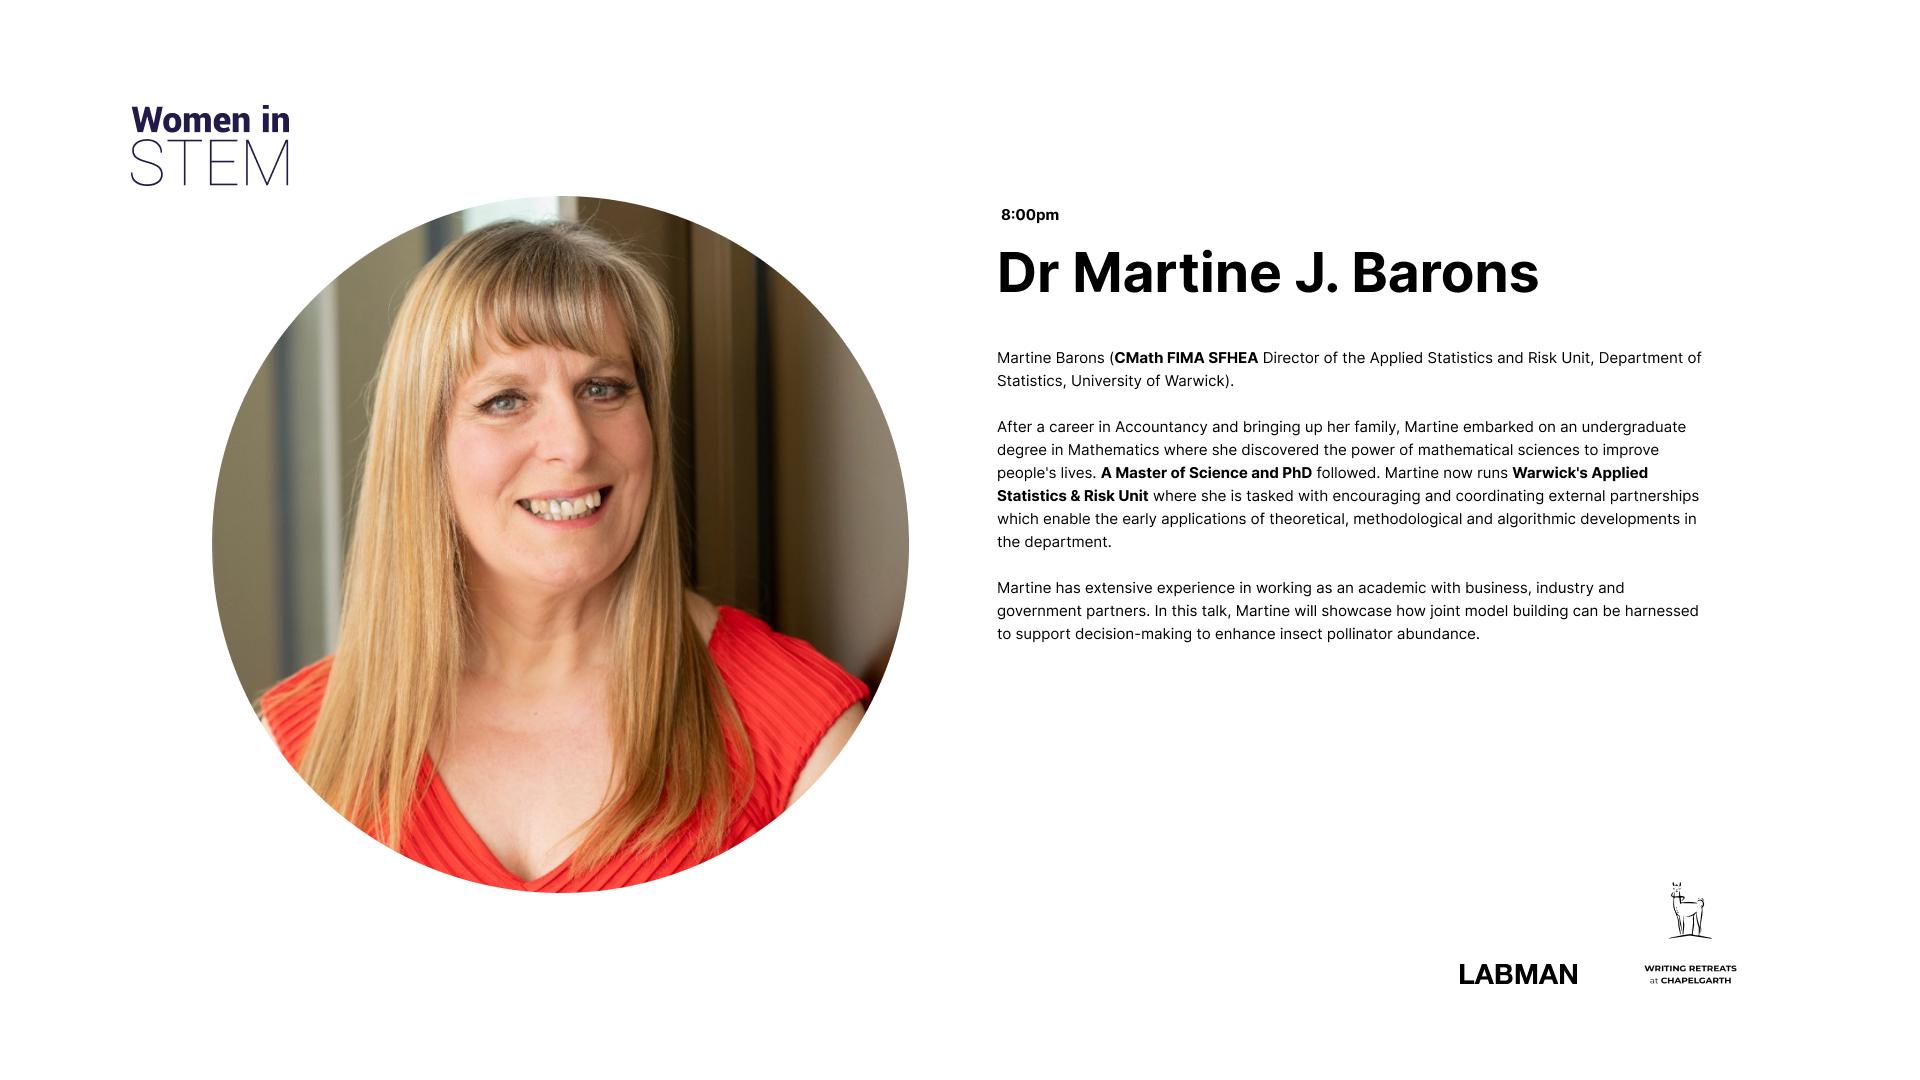 Dr Martine J. Barons will be speaking at Labman's Science Cabaret